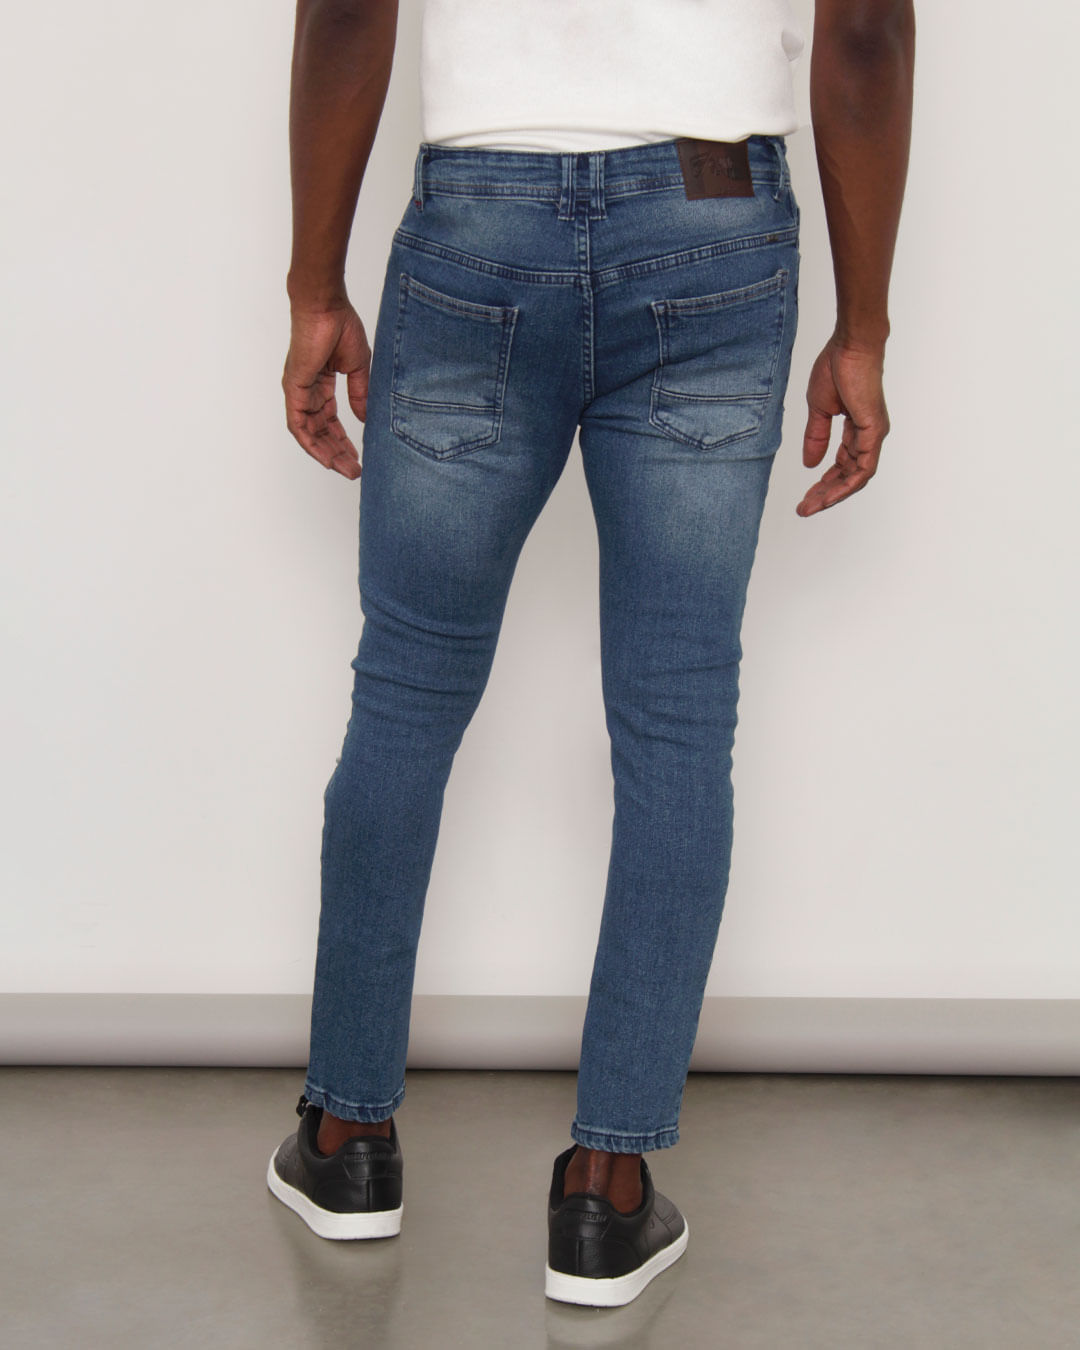 Calca-Jeans-Masculina-Gangster-Cropped-Destroyed-Azul